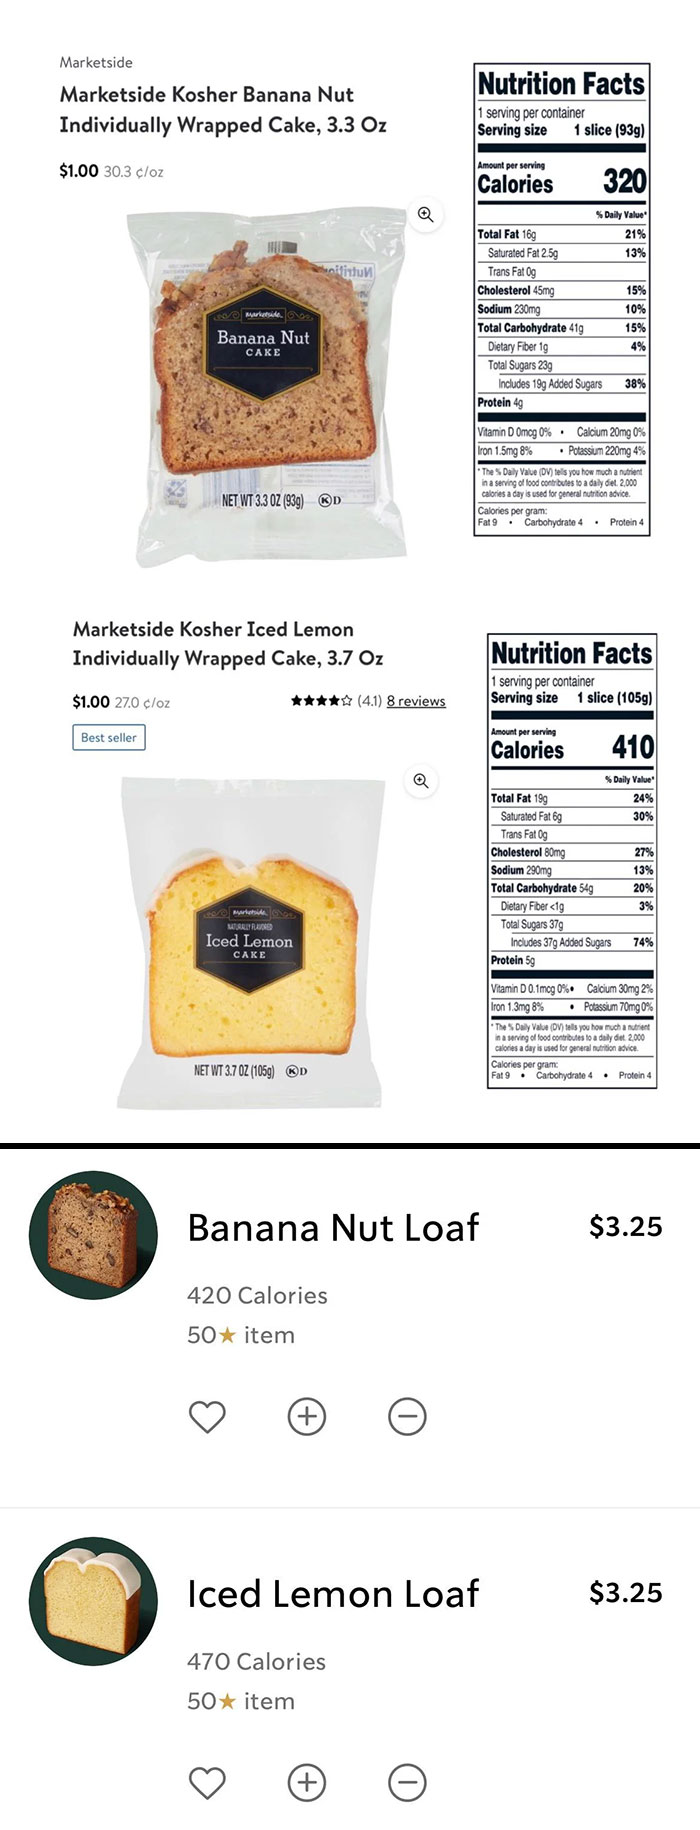 I Found Dupes Of Starbucks’s Banana Nut Loaf And Iced Lemon Loaf At Walmart For $1 Instead Of Over $3 And Less Calories Too! They Taste Identical.. Not A Massive $ Savings But A Big % Savings. These Little Things Add Up!